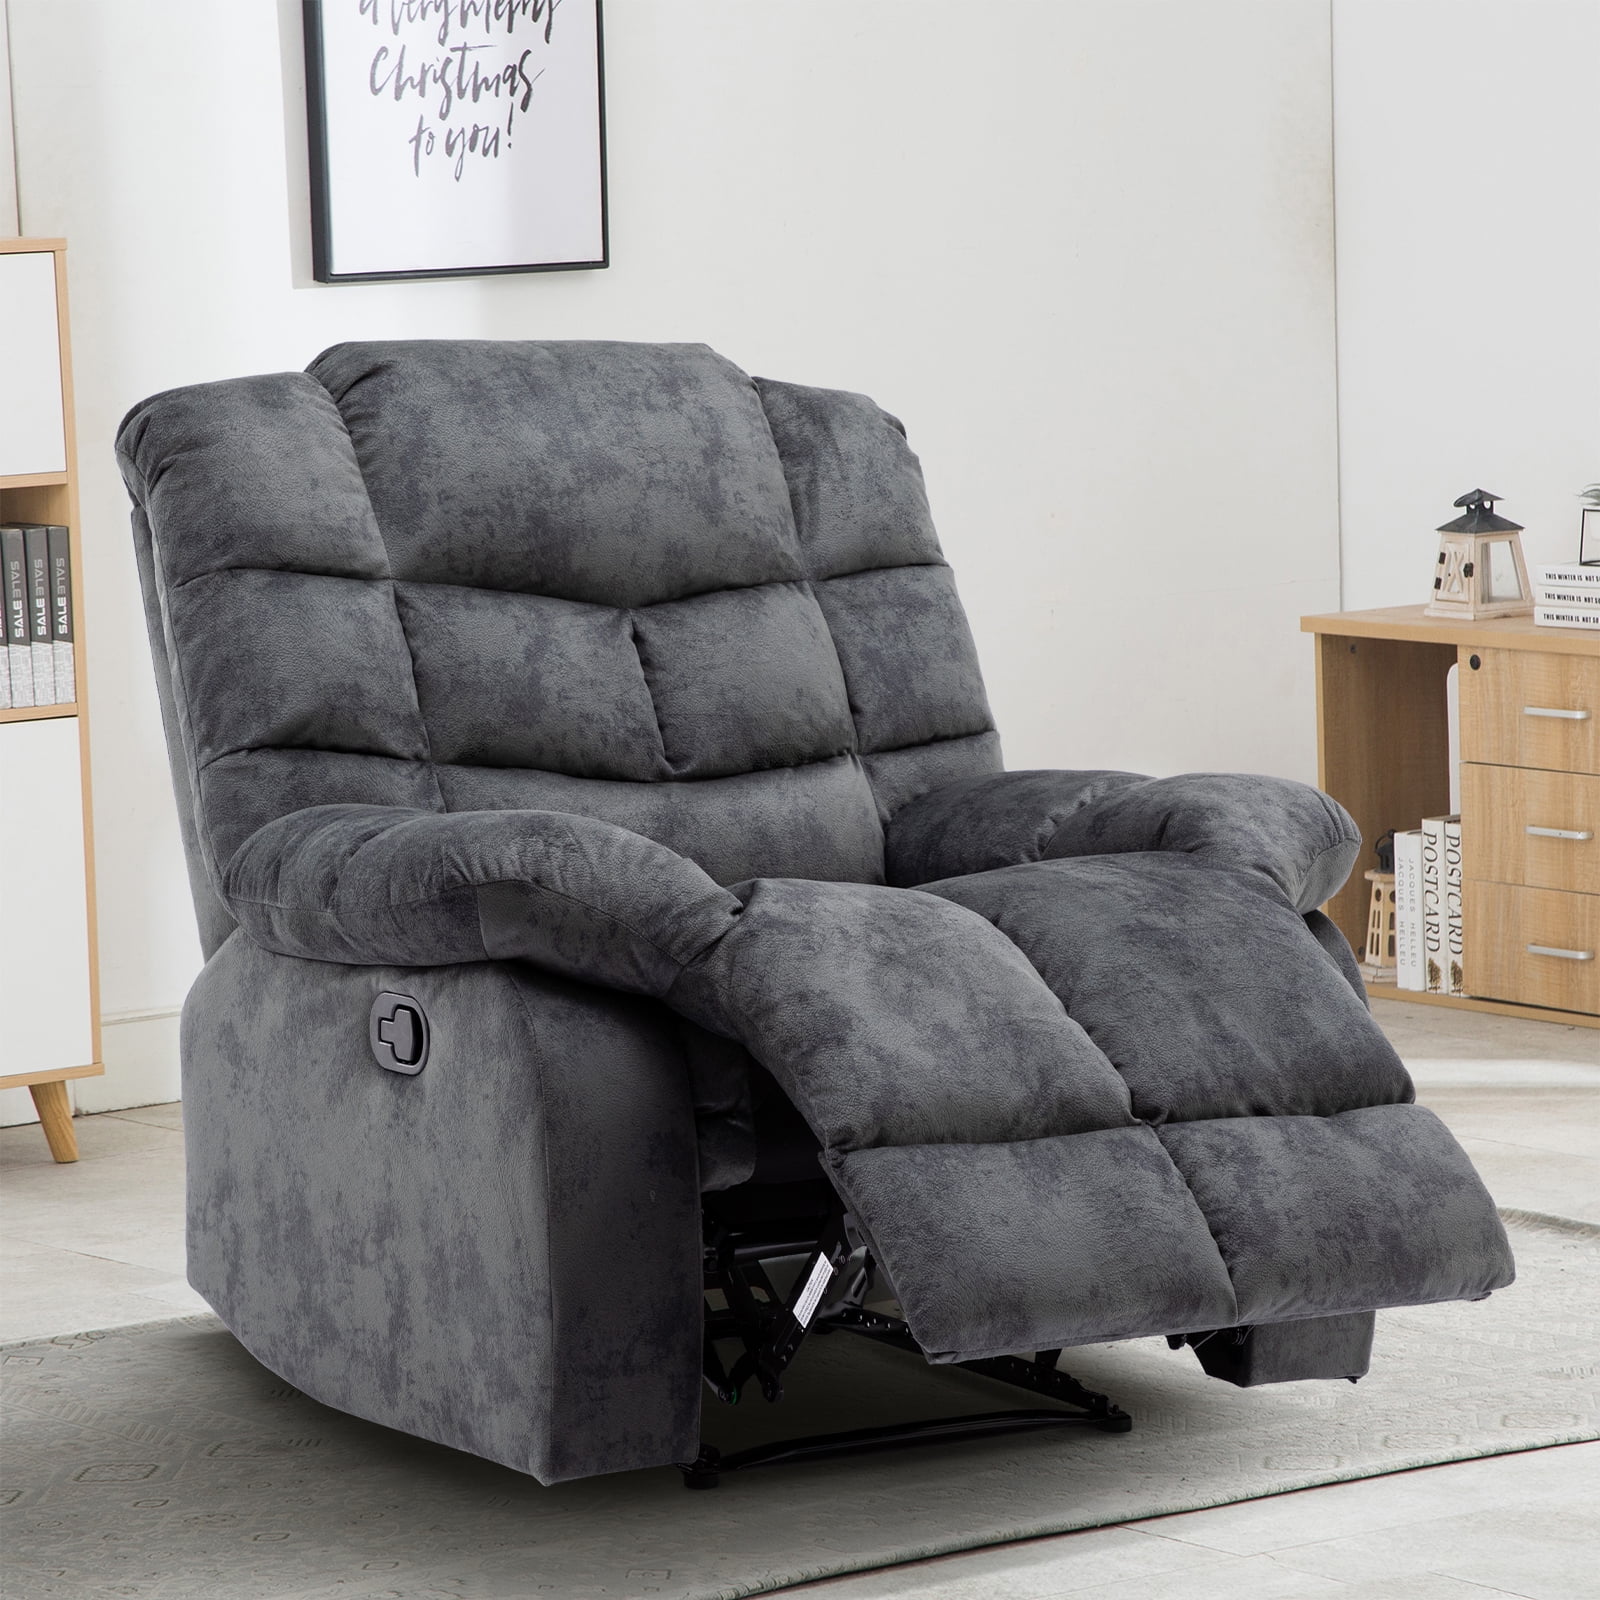 CANMOV Lazy Recliner Chair Overstuffed, Manual Reclining Single Couch Wall  Hugger Fabric Recliners Sofa, Gray